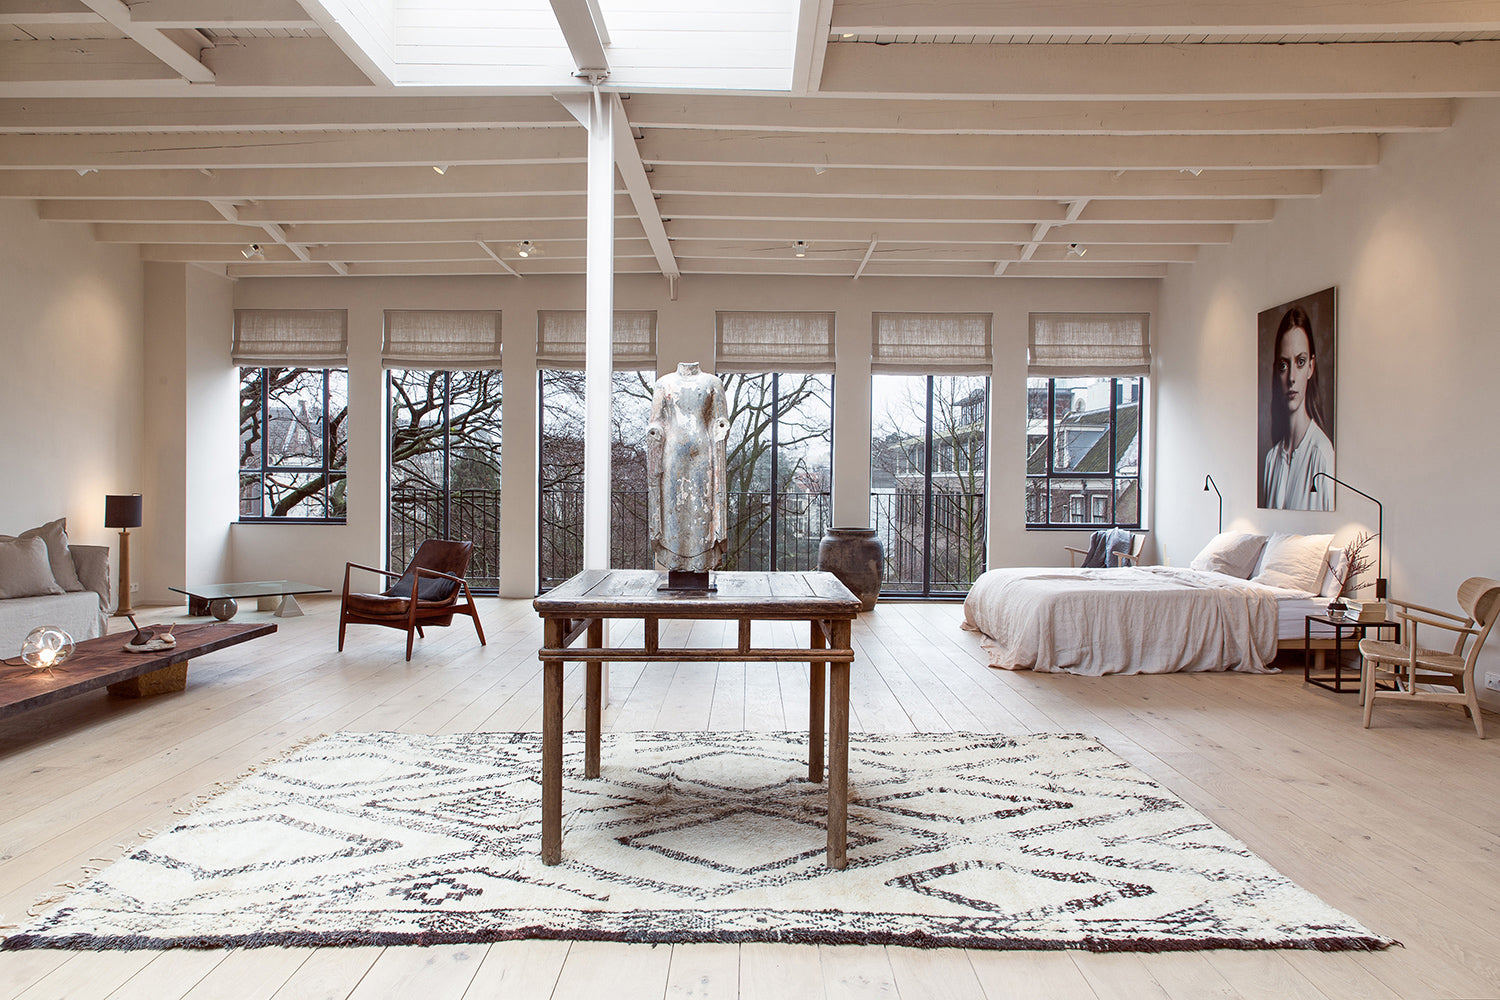 Enter The Loft IV Edition - a lofty living room filled with design furniture and lots of windows